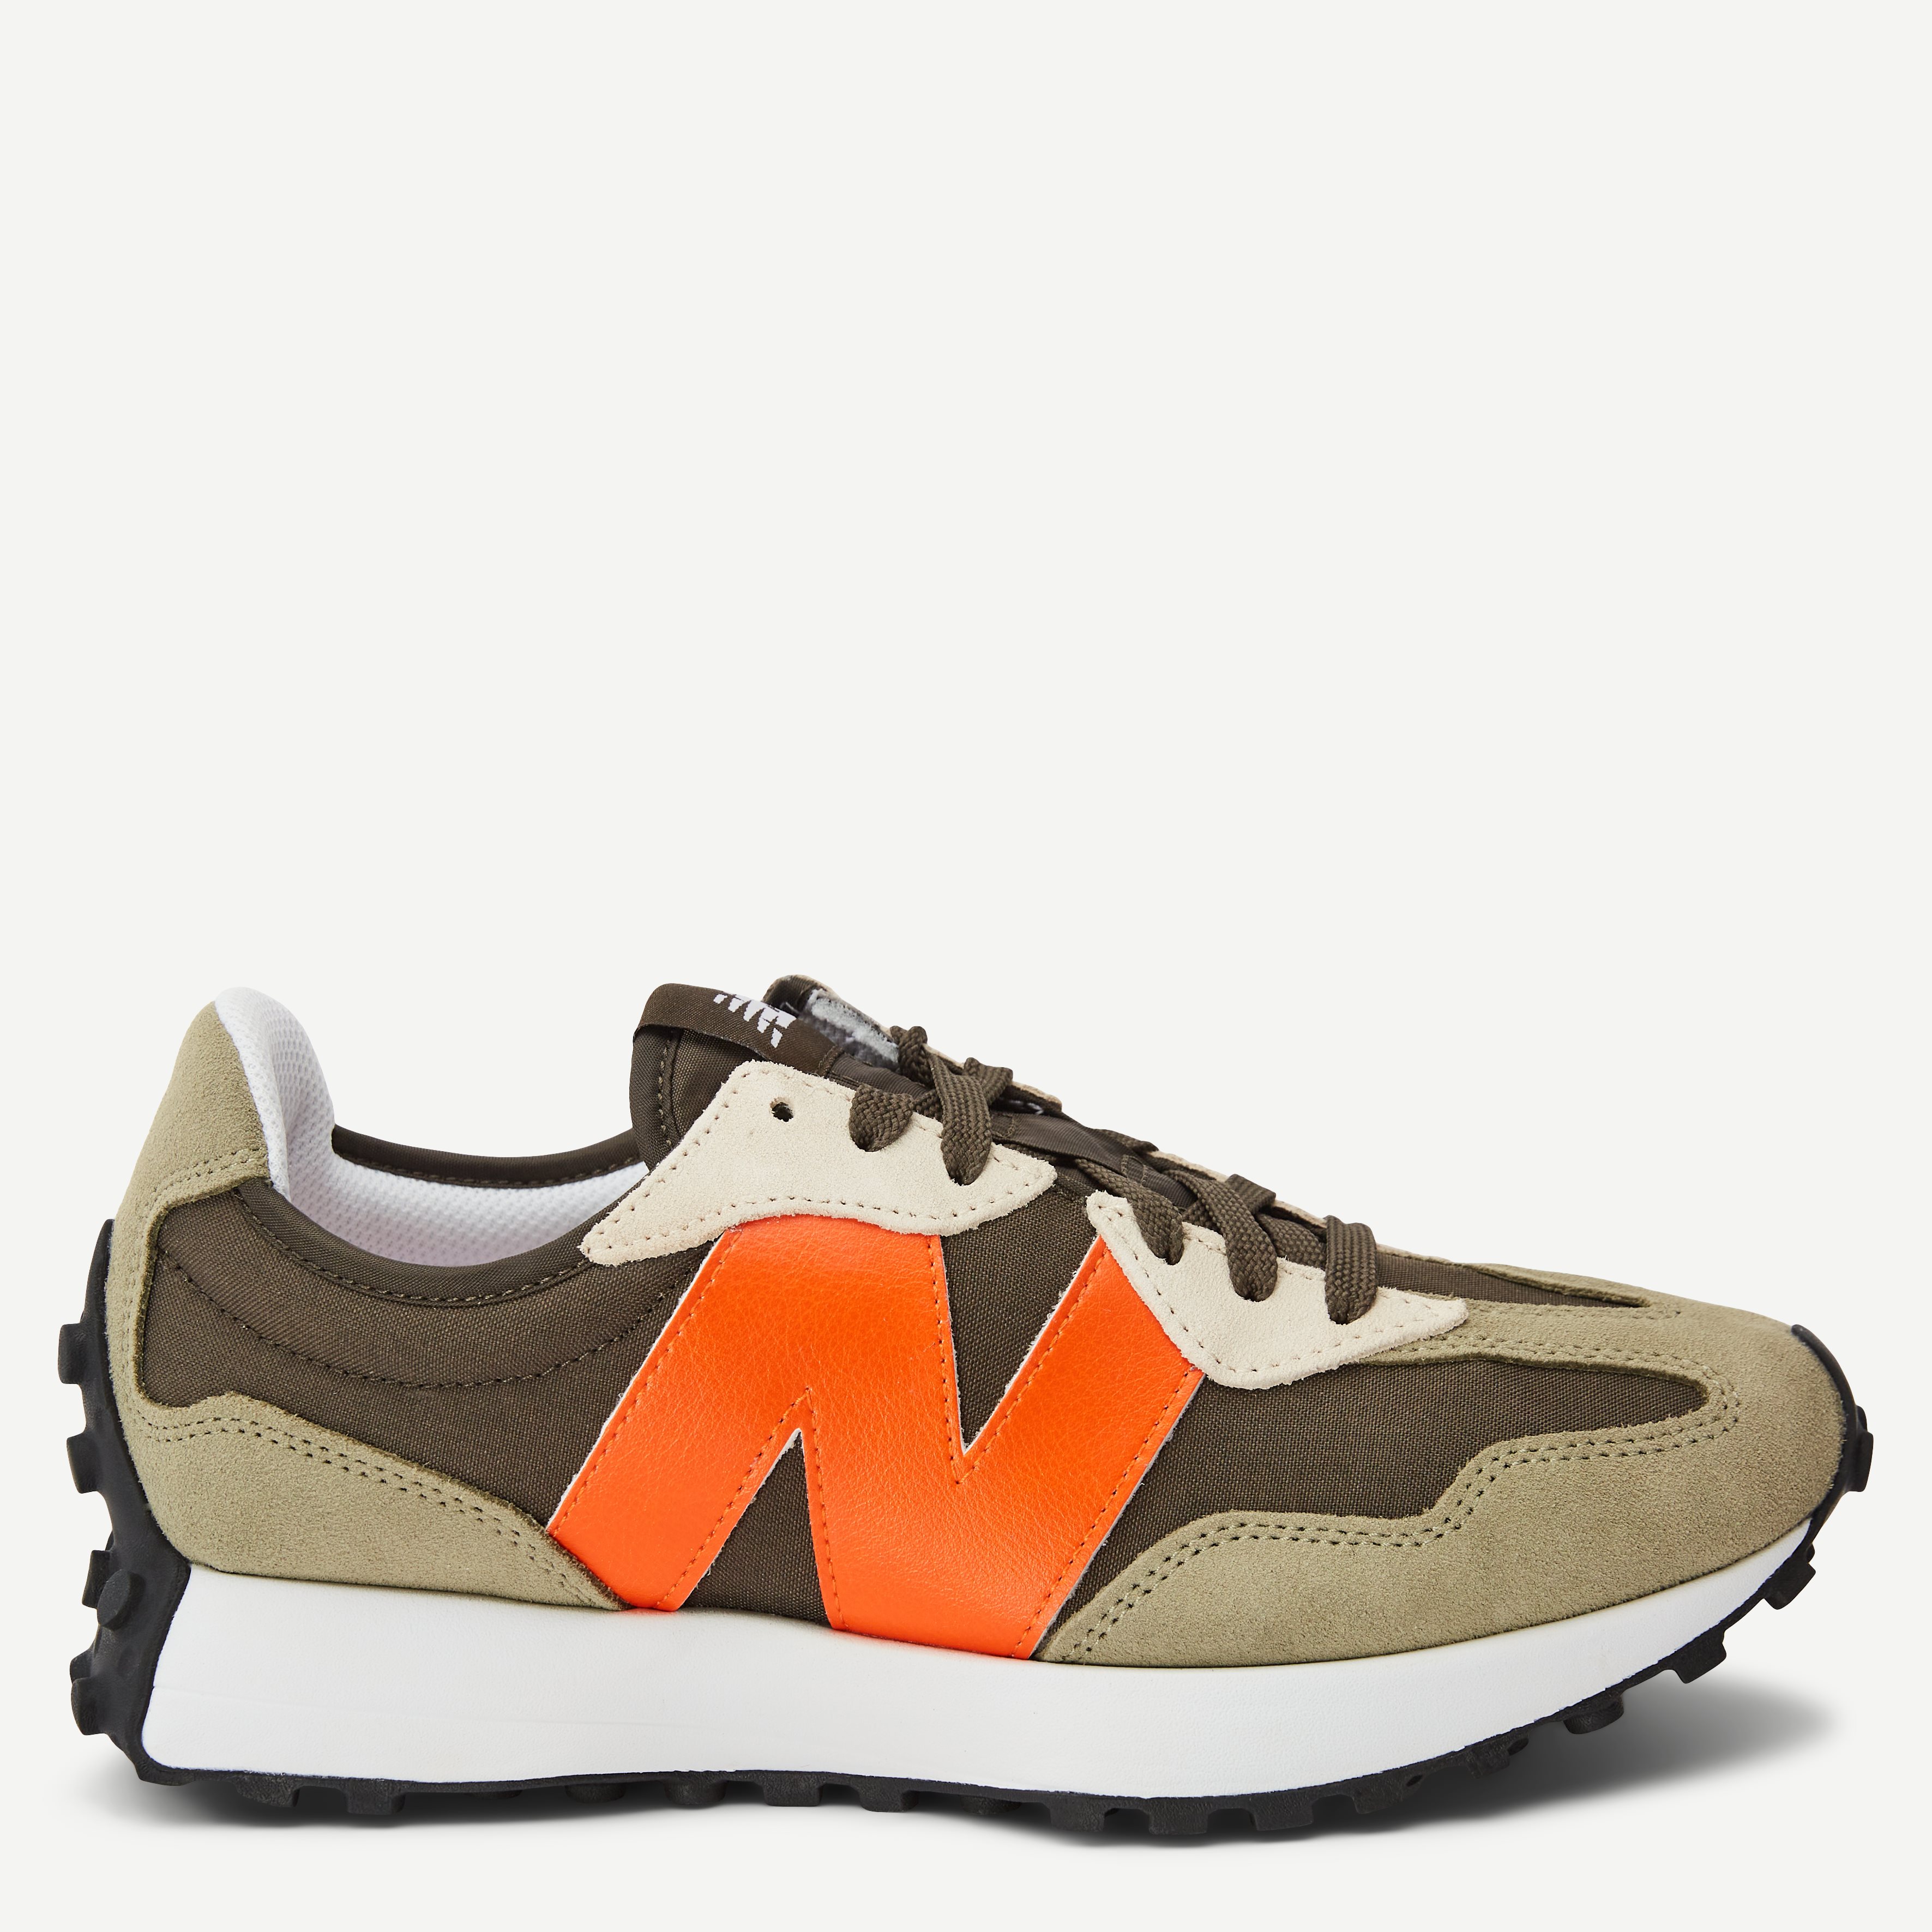 New Balance Shoes MS327 BE Army